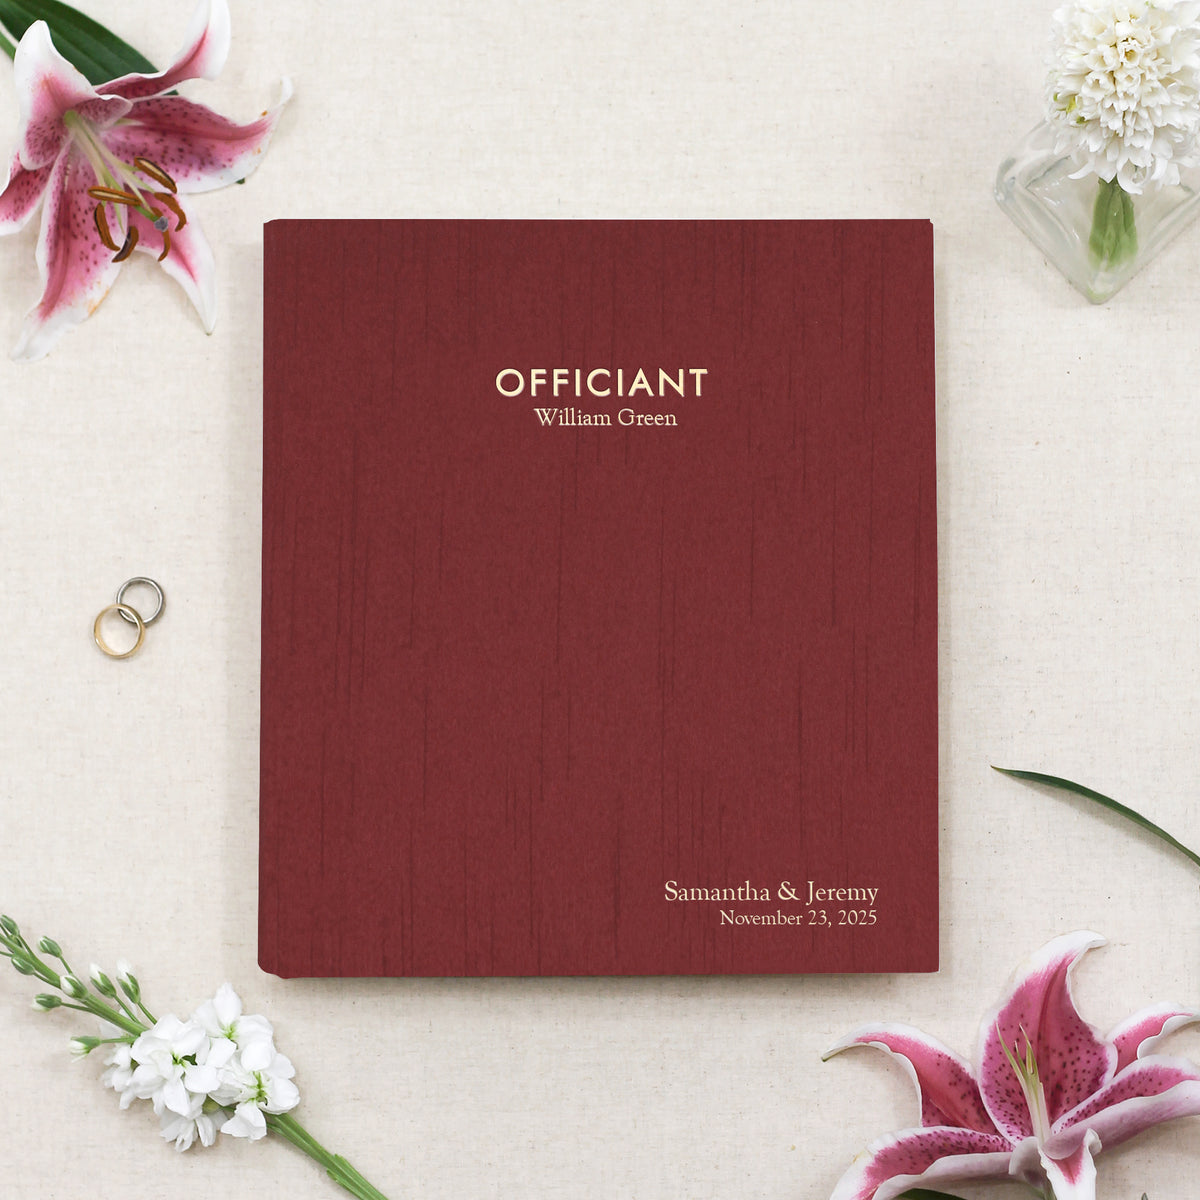 Officiant Binder | Cover: Garnet Silk | Available Personalized